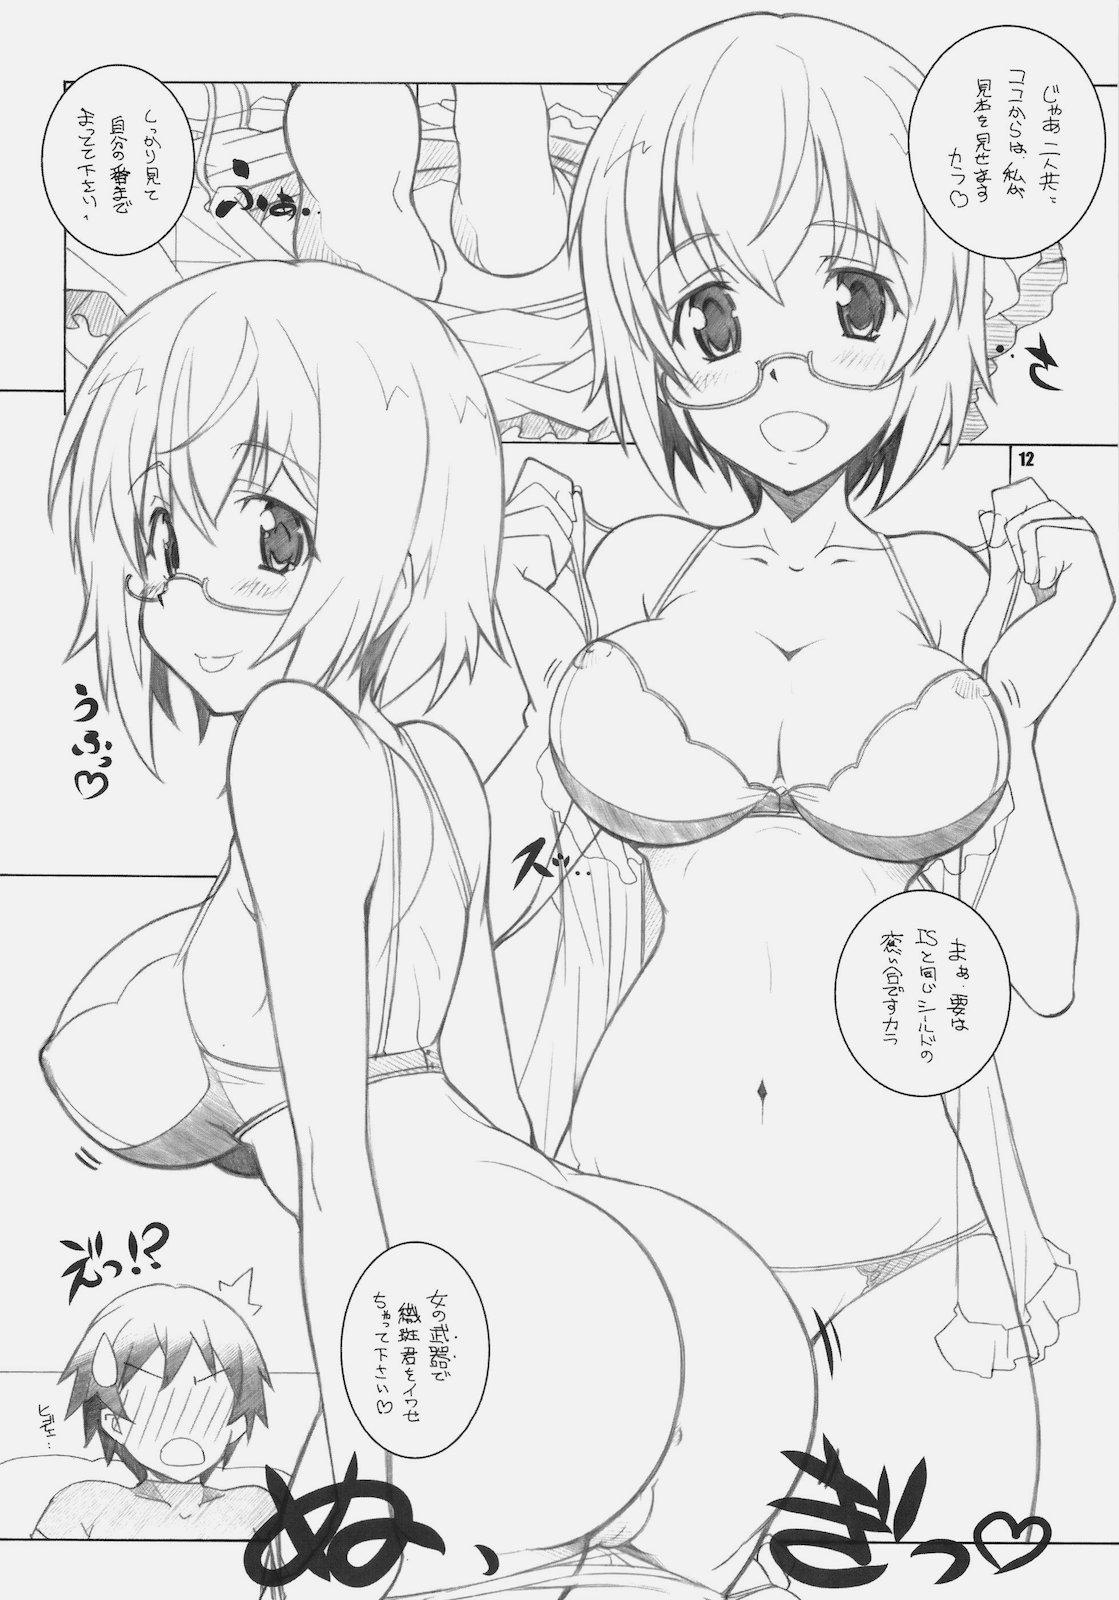 Fuck SEA IS - Infinite stratos Pink Pussy - Page 11